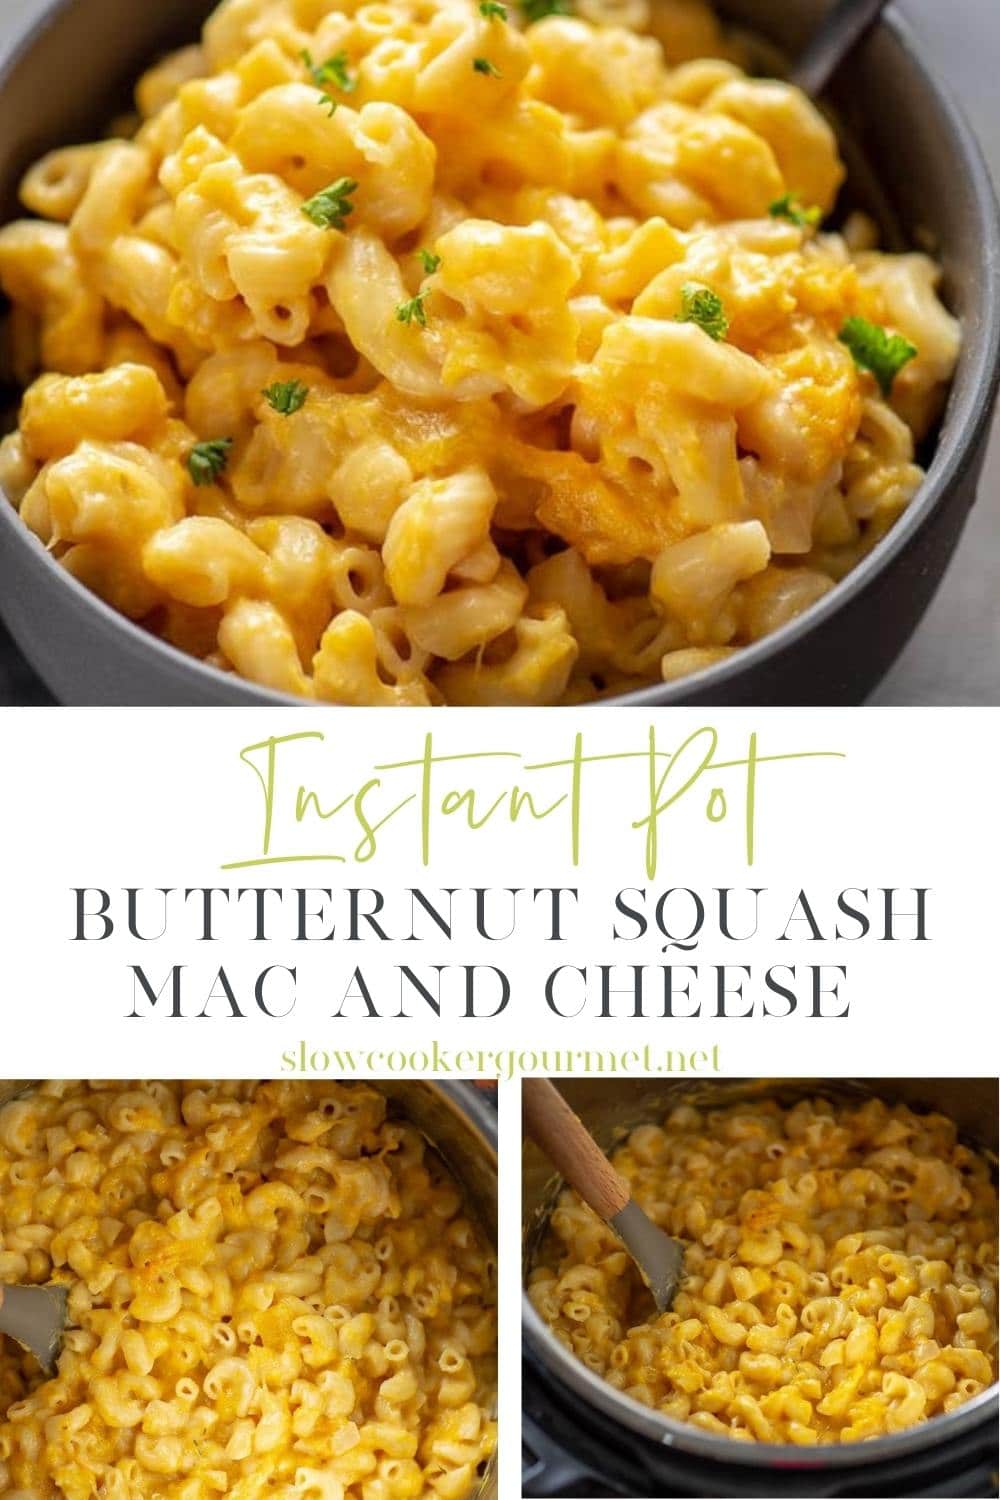 Instant Pot Butternut Squash Mac and Cheese - Slow Cooker Gourmet